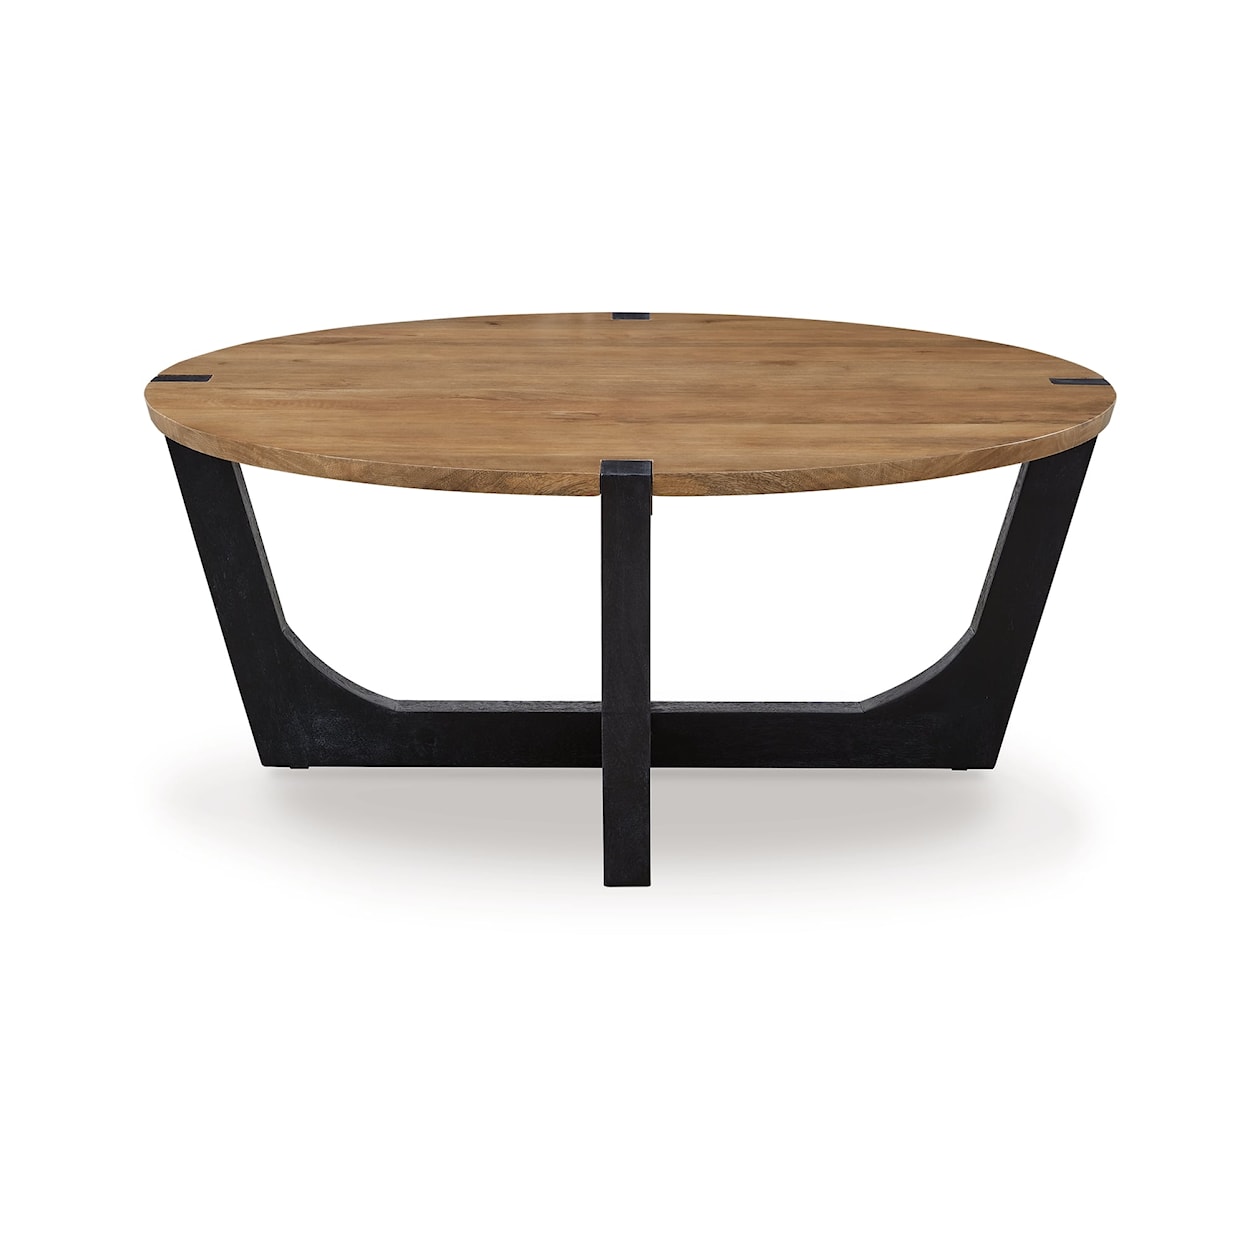 Benchcraft Hanneforth Round Coffee Table